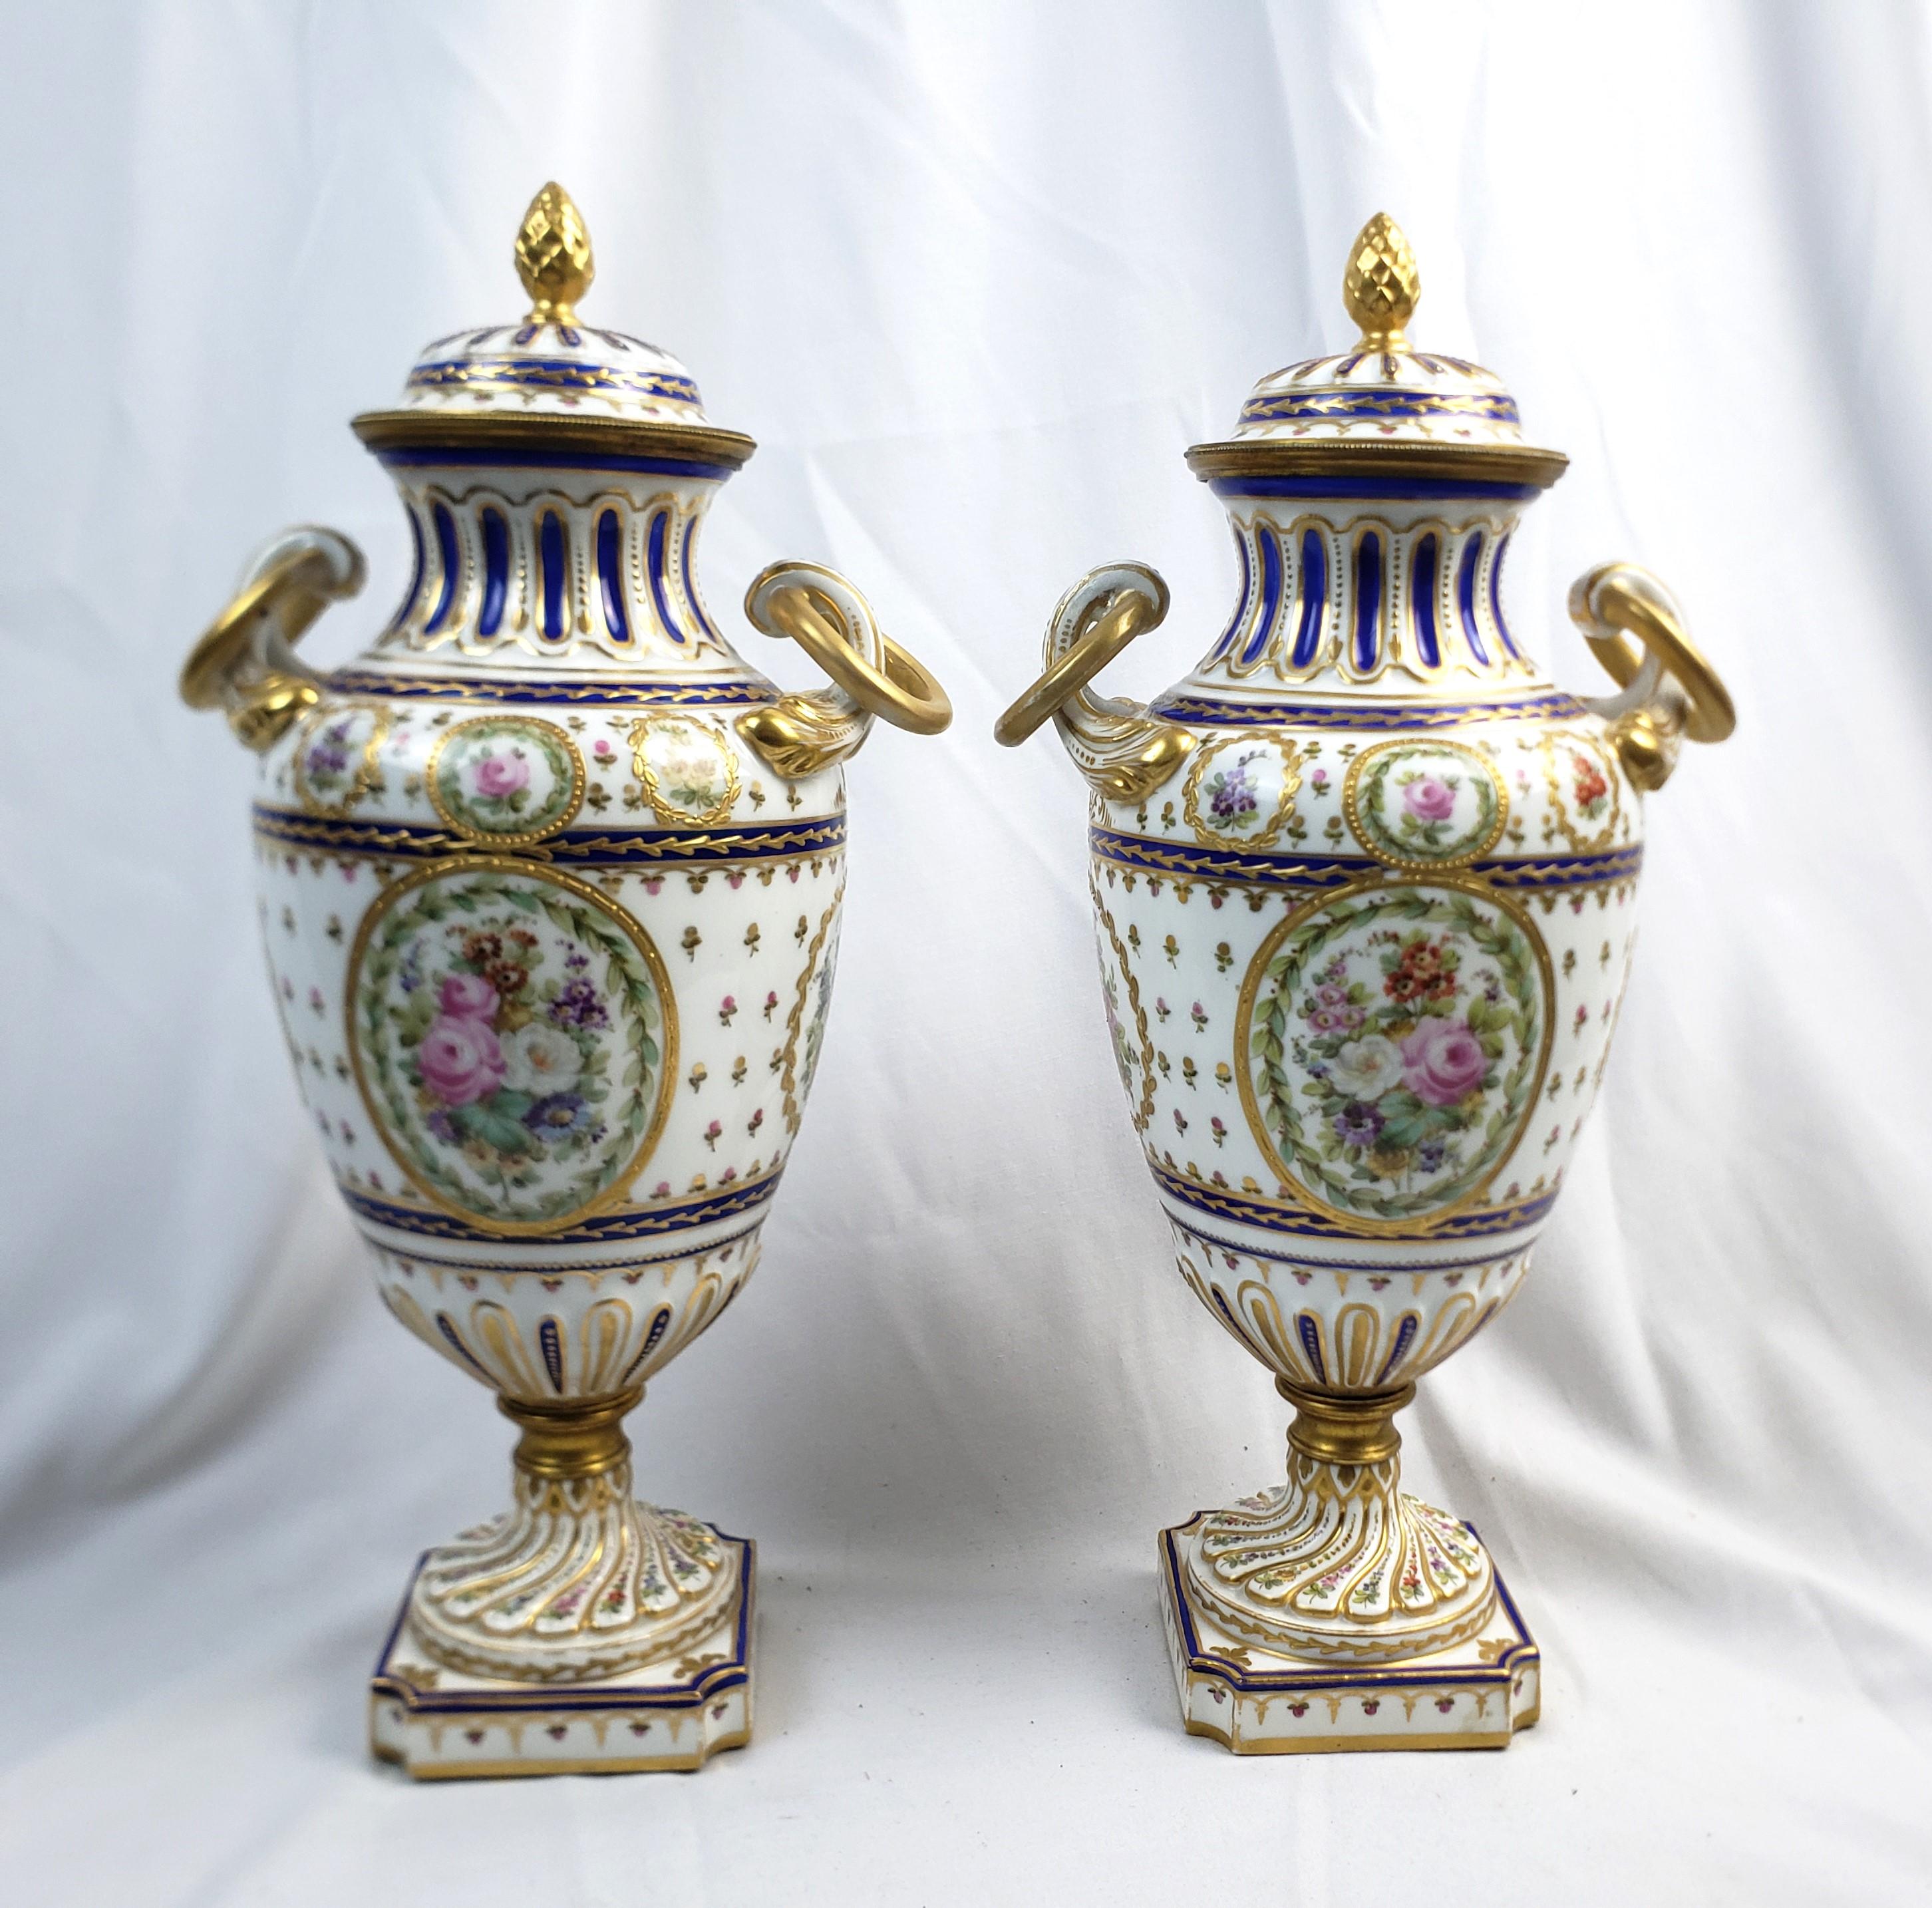 This pair of antique covered urns are signed by and unknown maker, and presumed to have originated from France and date to approximately 1880 and done in the Sevres style. The covered urns are done in porcelain with a white grouns and cobalt blue